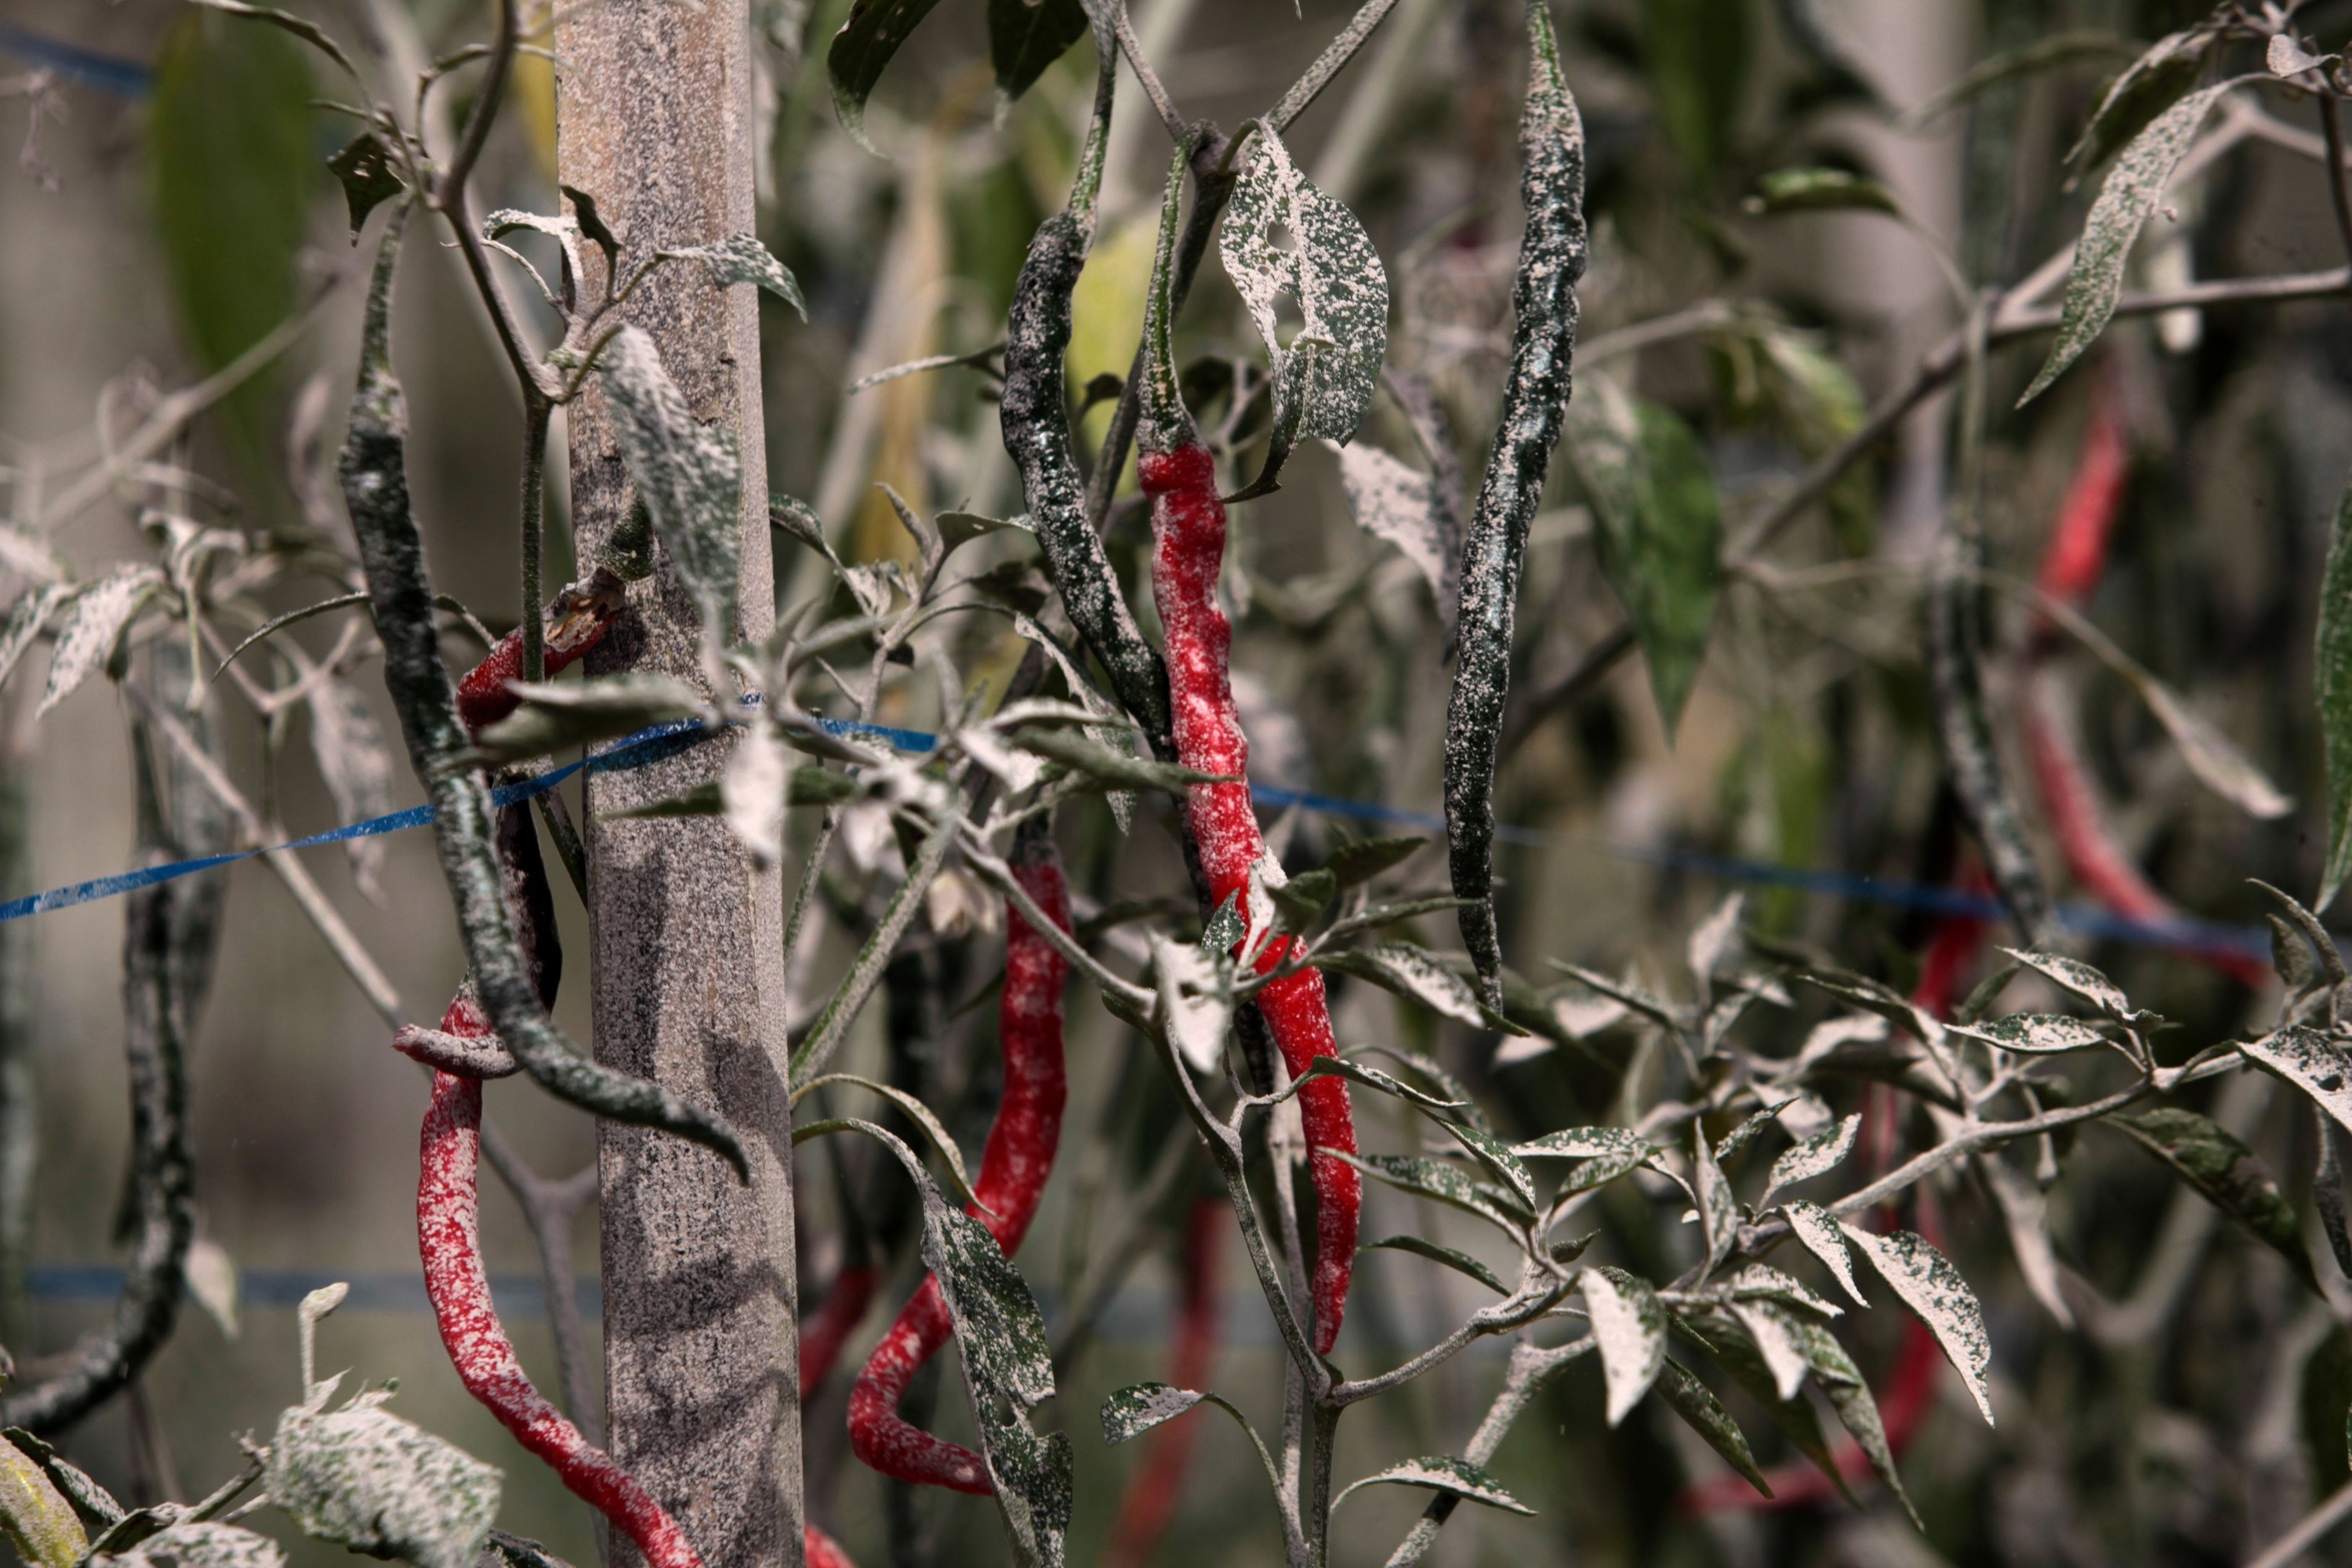 Bright red and dark green chilis are covered in ash as they grow from the vine